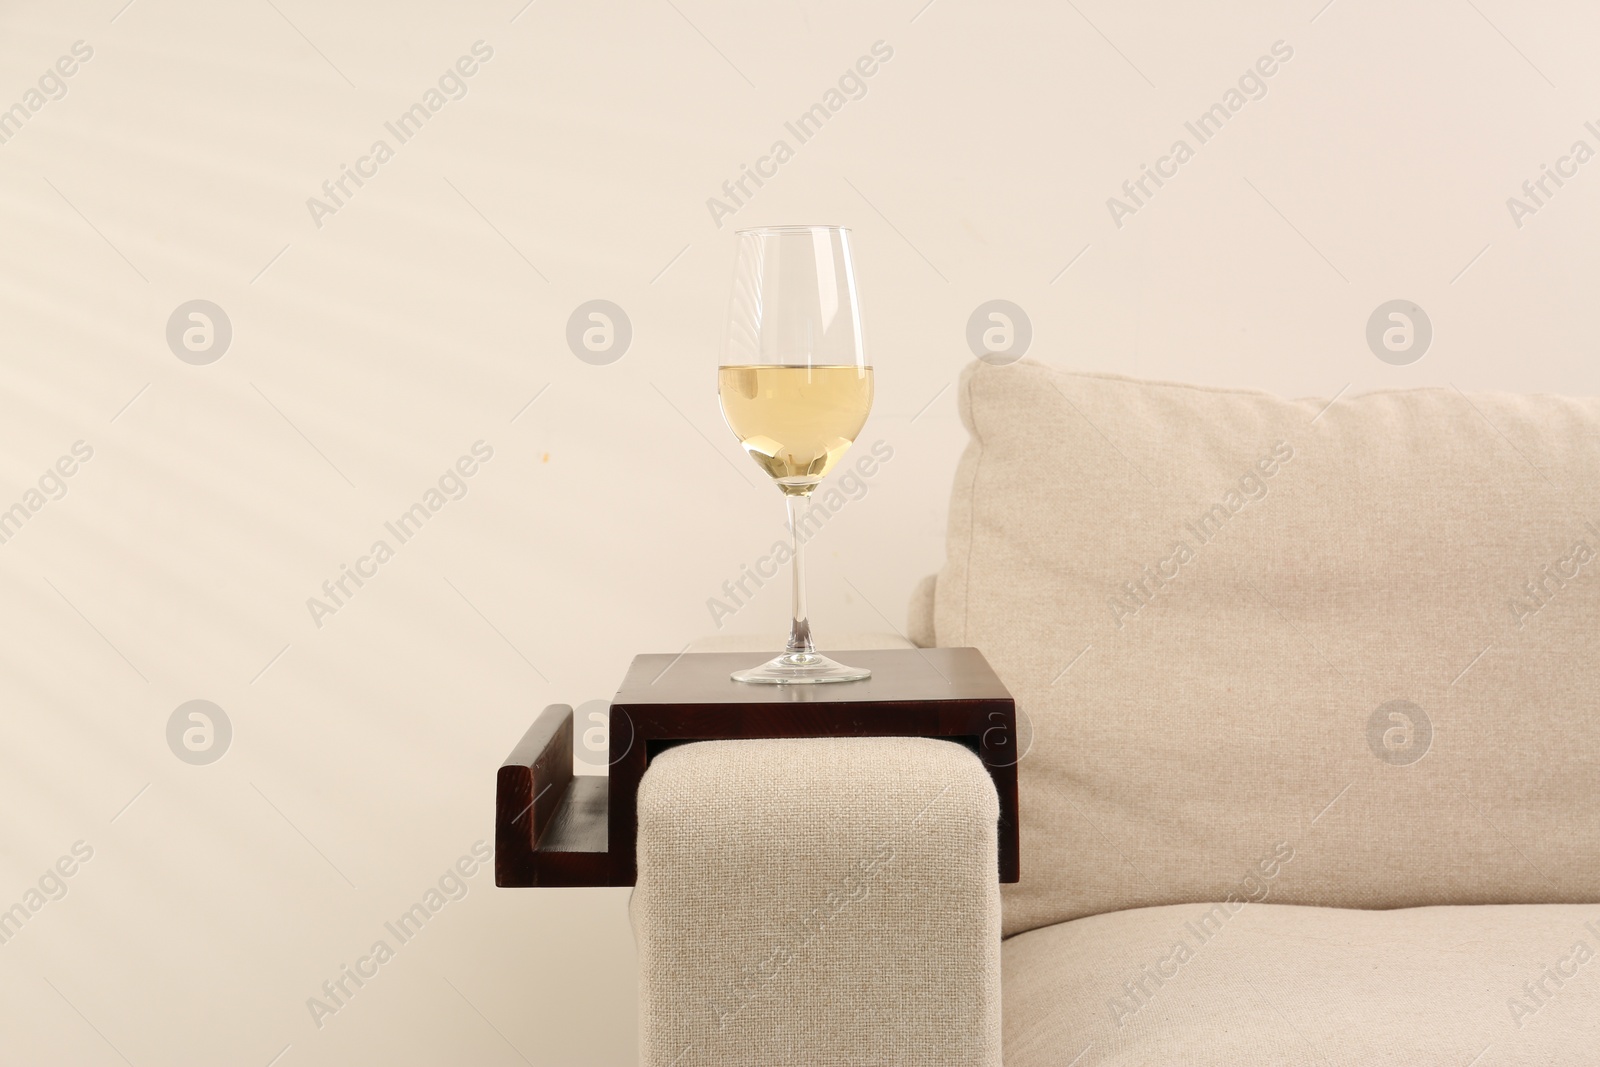 Photo of Glass of white wine on sofa with wooden armrest table indoors. Interior element